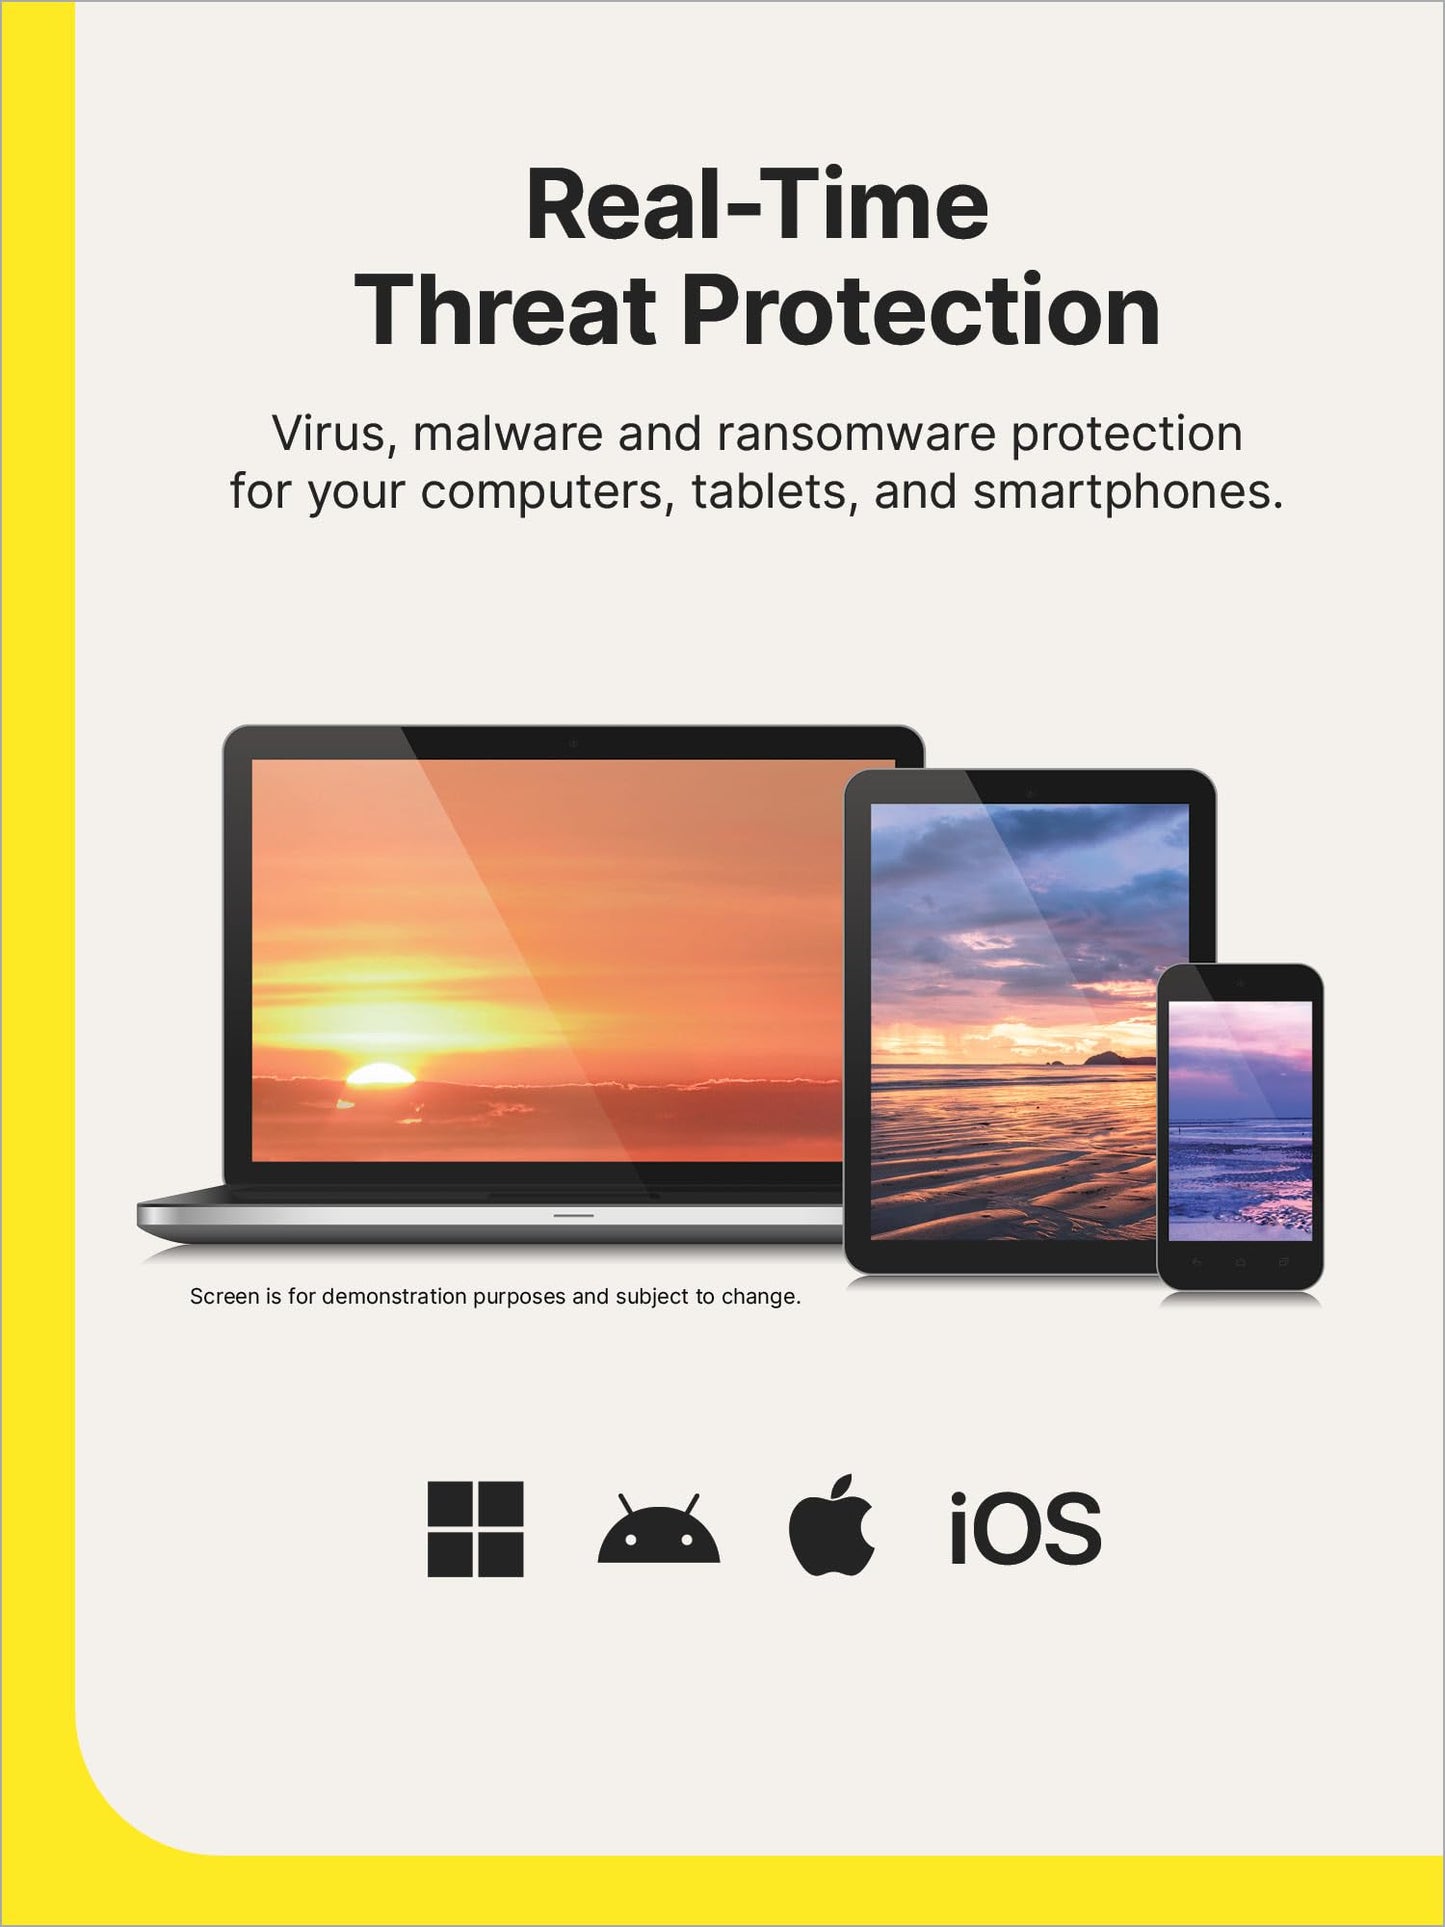 Norton 360 Premium 2024, Antivirus software for 10 Devices with Auto Renewal - Includes VPN, PC Cloud Backup & Dark Web Monitoring [Download]